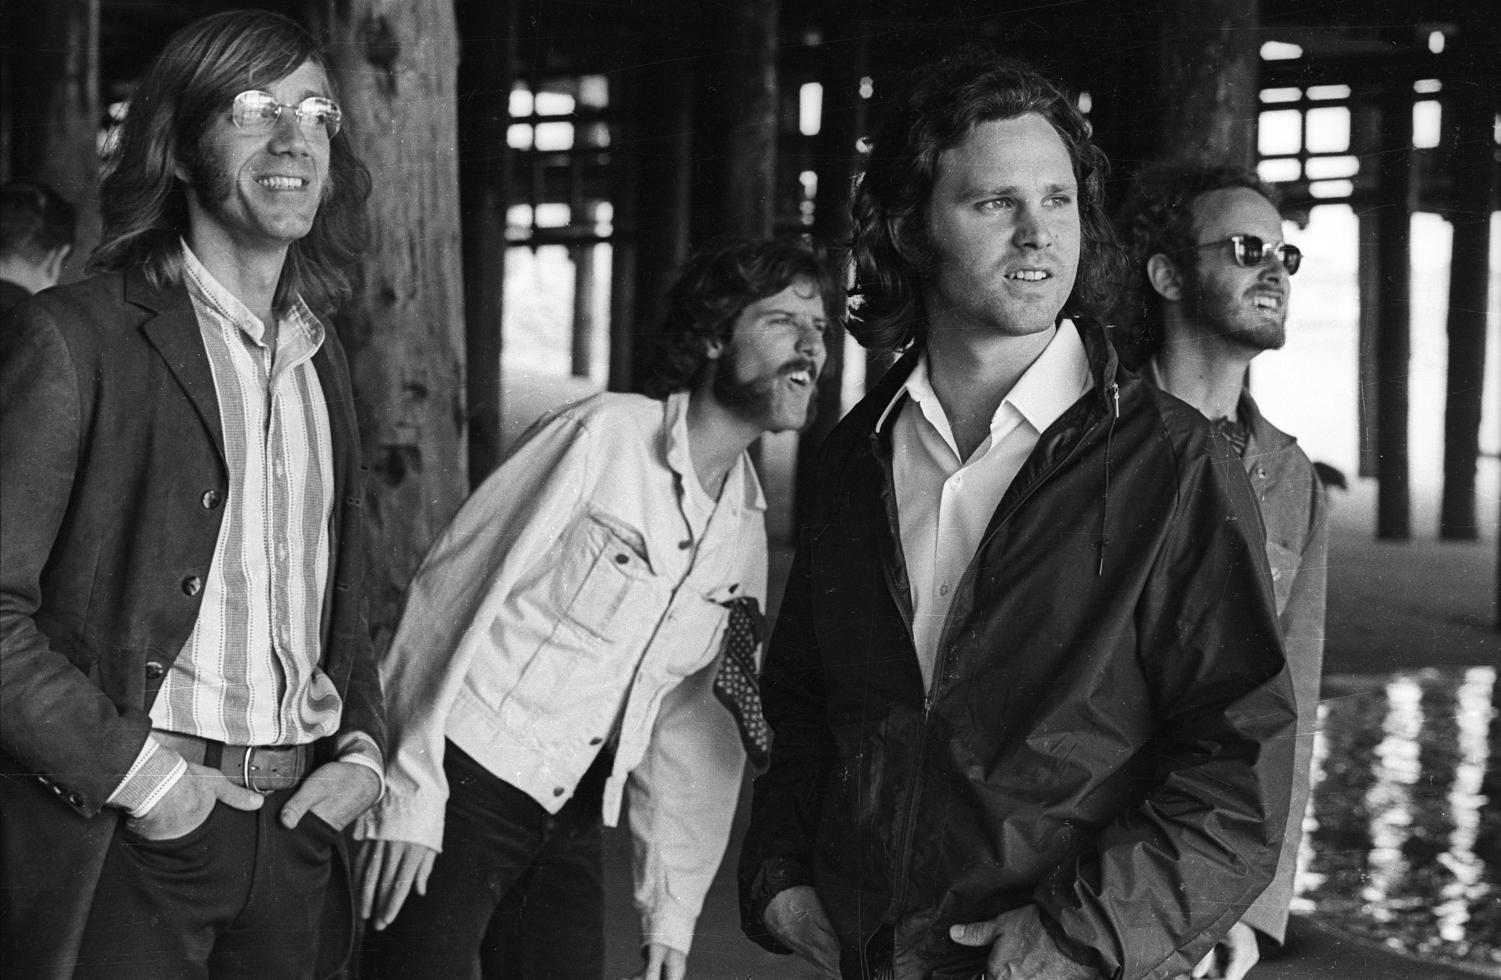 Henry Diltz Black and White Photograph - The Doors, Venice Pier, CA 1969